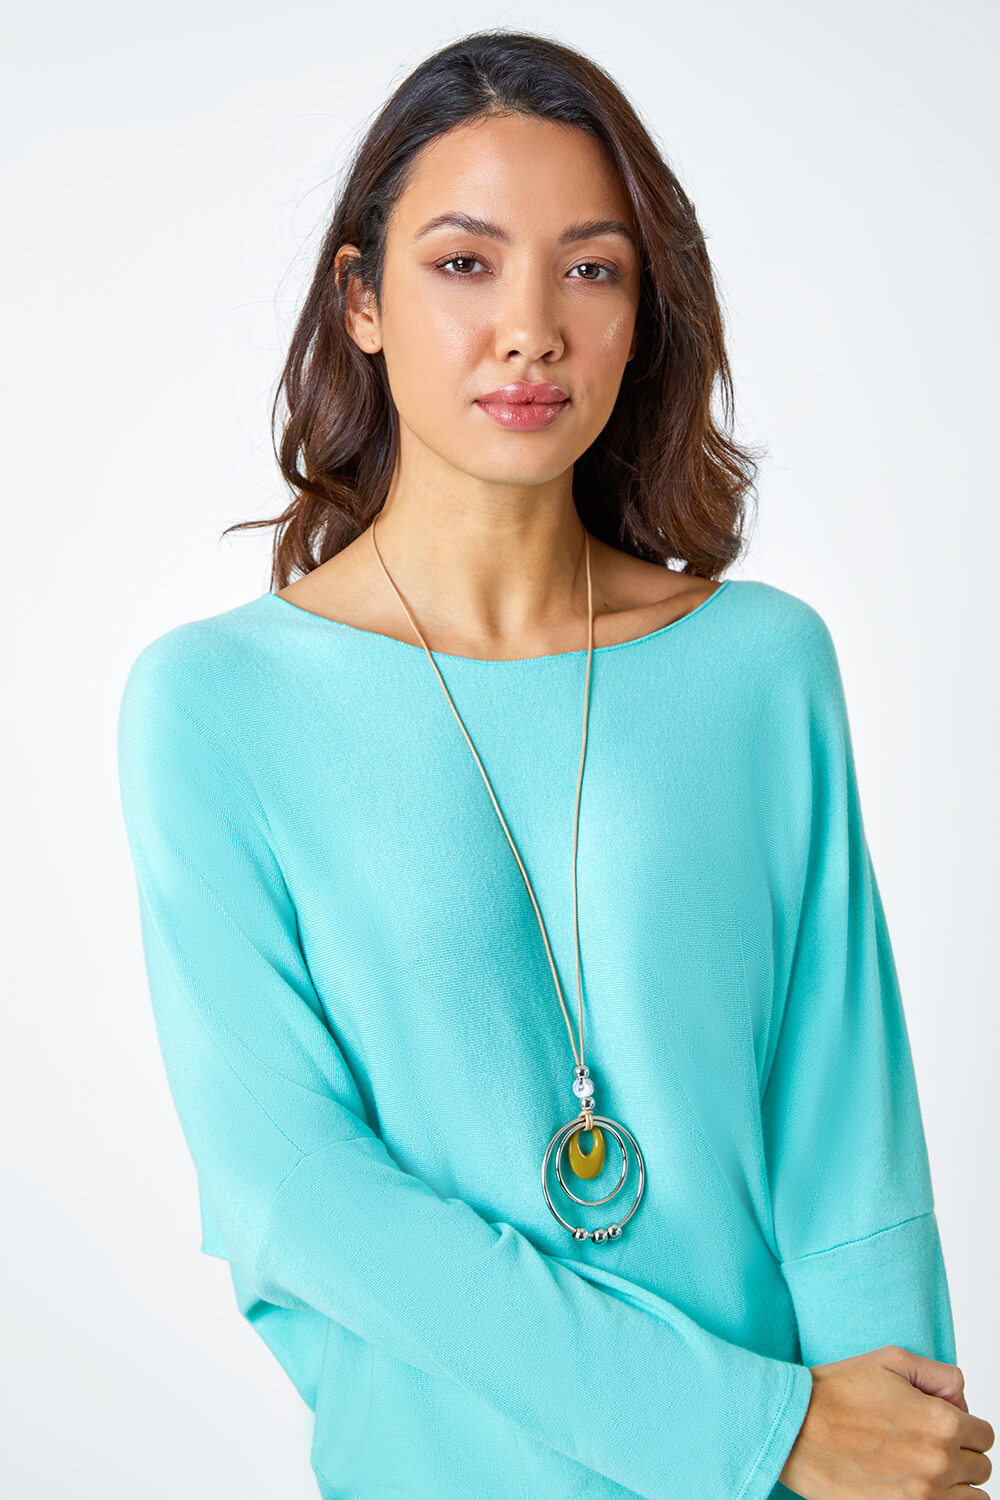 Aqua Necklace Detail Stretch Knit Top, Image 4 of 5